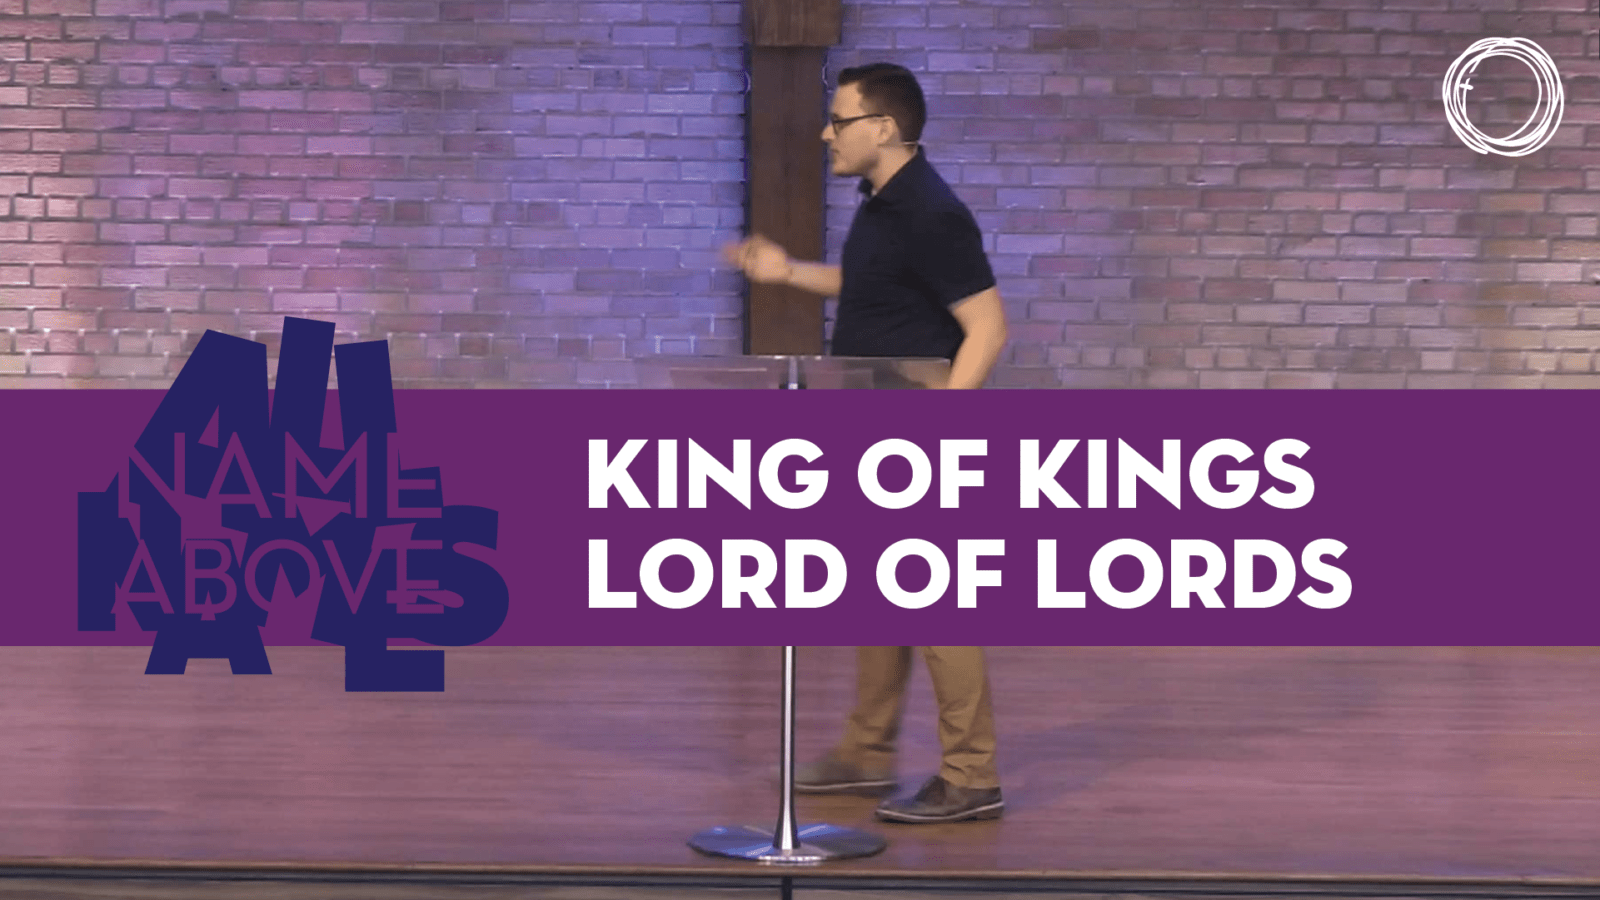 King of kings and Lord of lords